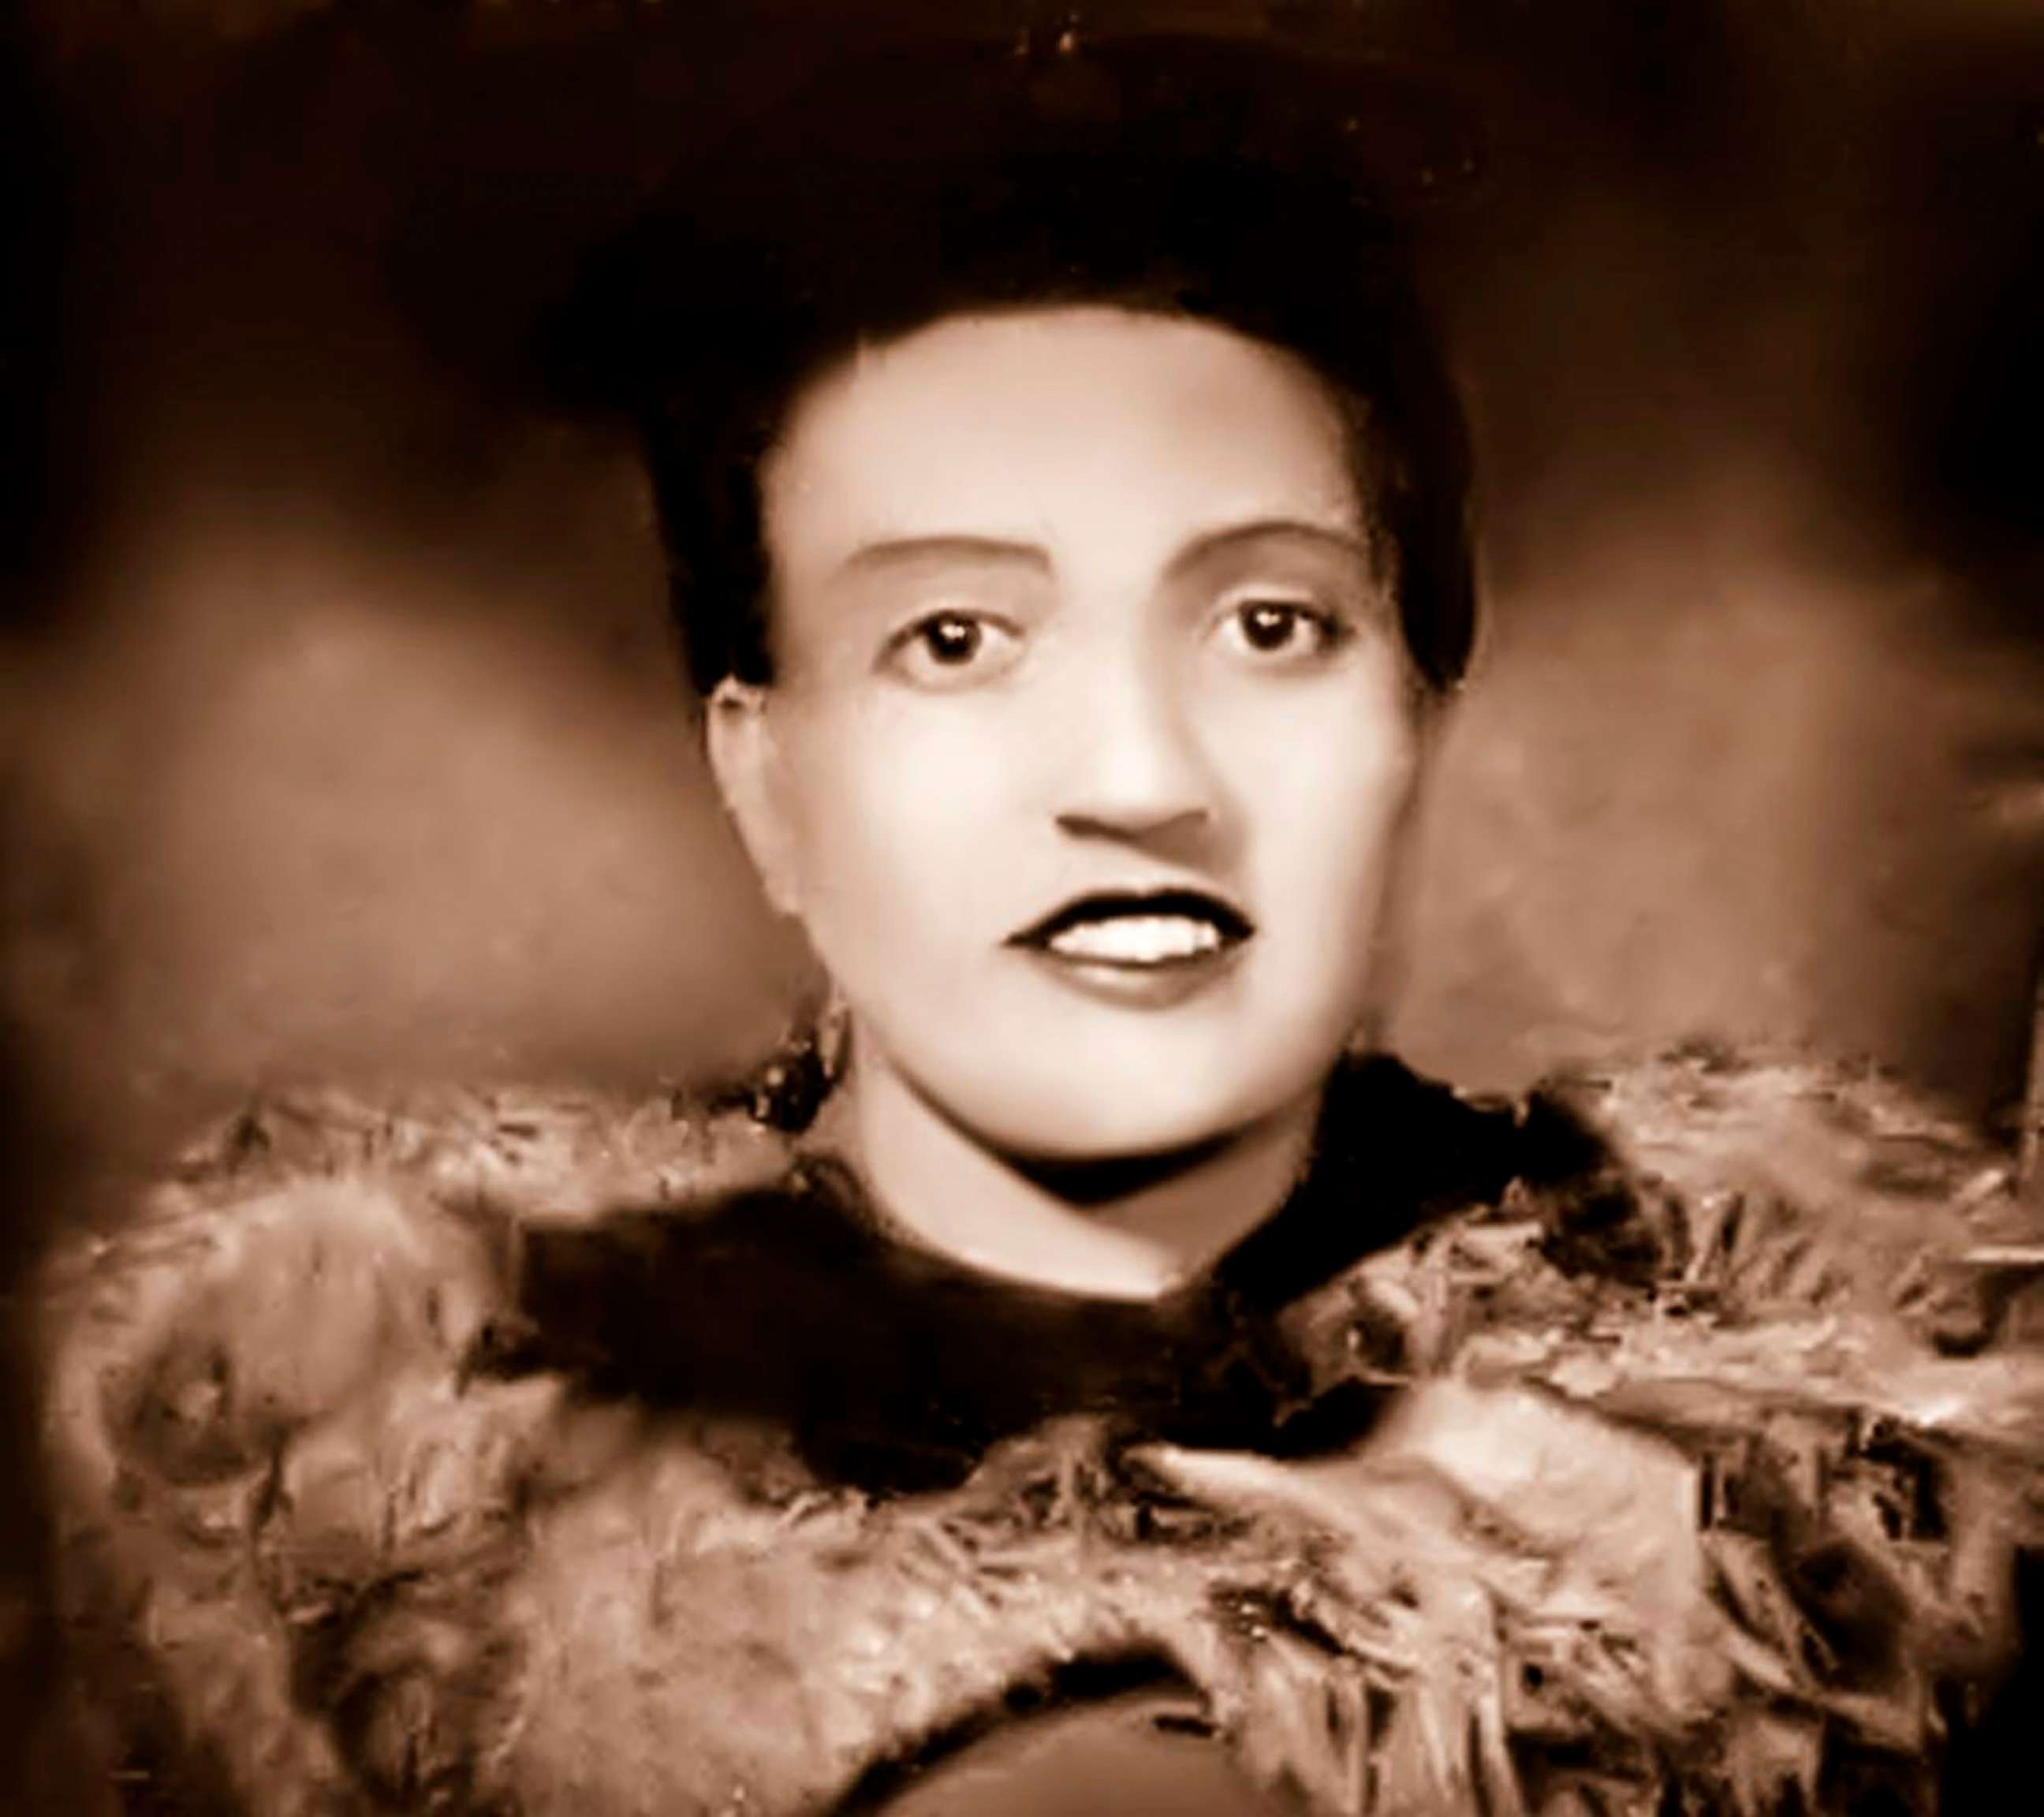 PHOTO: A photo of Henrietta Lacks shortly after she and her husband David Lacks moved from Clover, Virginia to Baltimore, Maryland in the early 1940s.